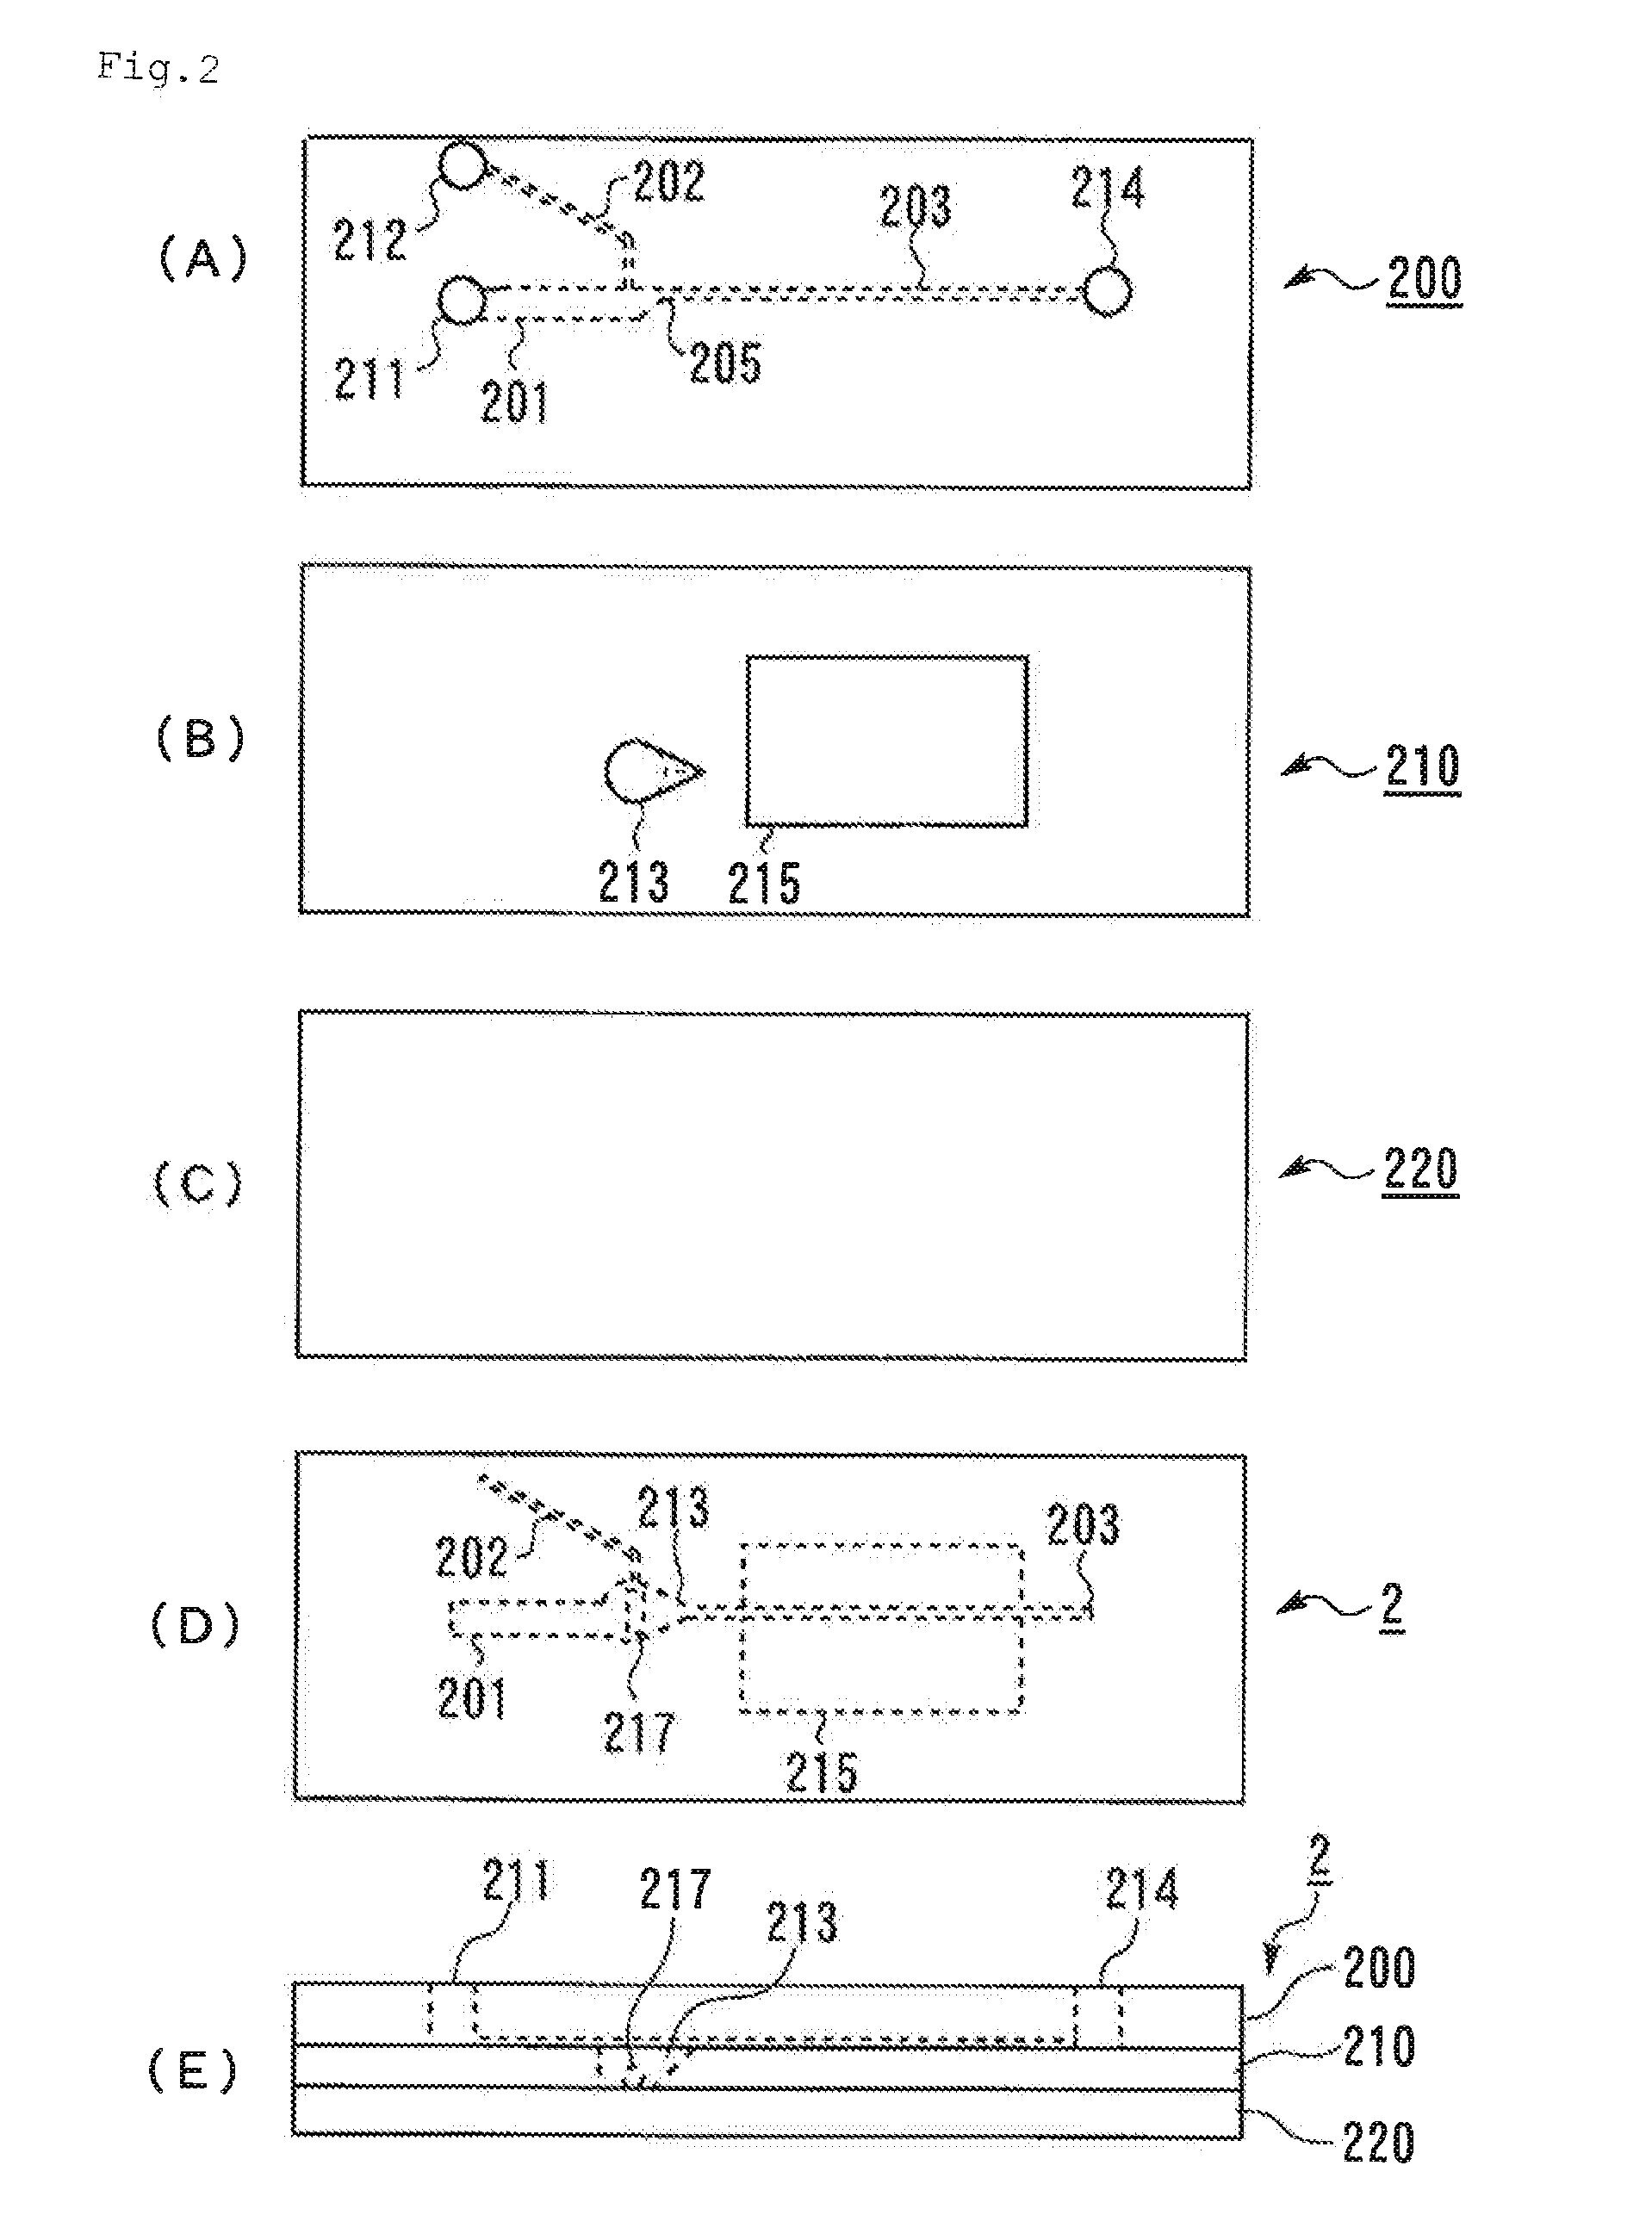 Microchip and blood monitoring device